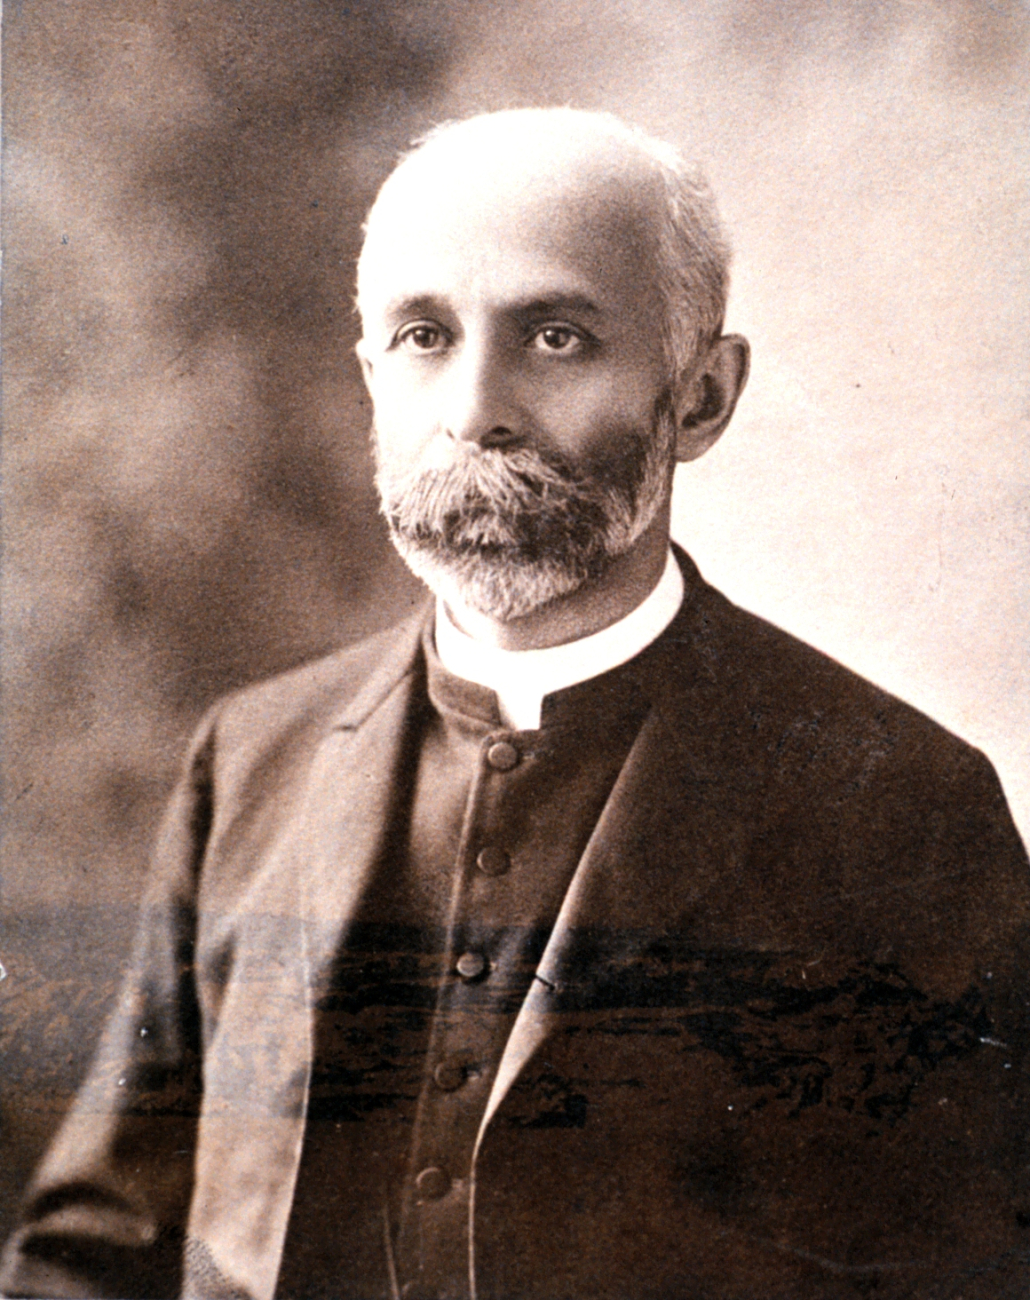 Frank Bigelow of the United States Weather Bureau and an Episcopalian priest,1851-1924